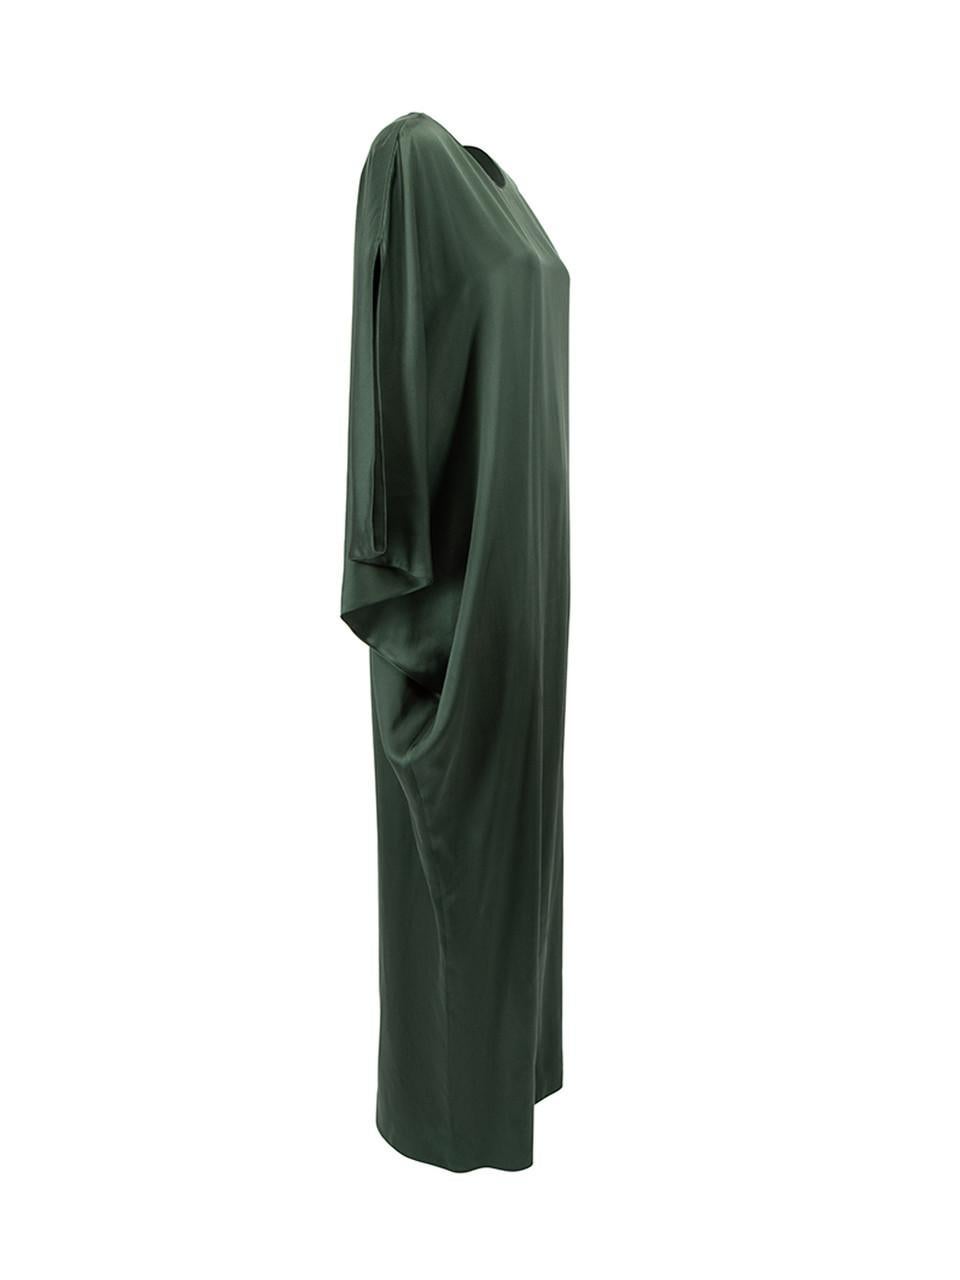 CONDITION is Very good. Hardly any visible wear to dress is evident on this used Lanvin designer resale item. Details Forest green Silk Loose fit Round neck Asymmetric design 1x Single bat wing sleeve Midi length Made in France Composition 100% Silk